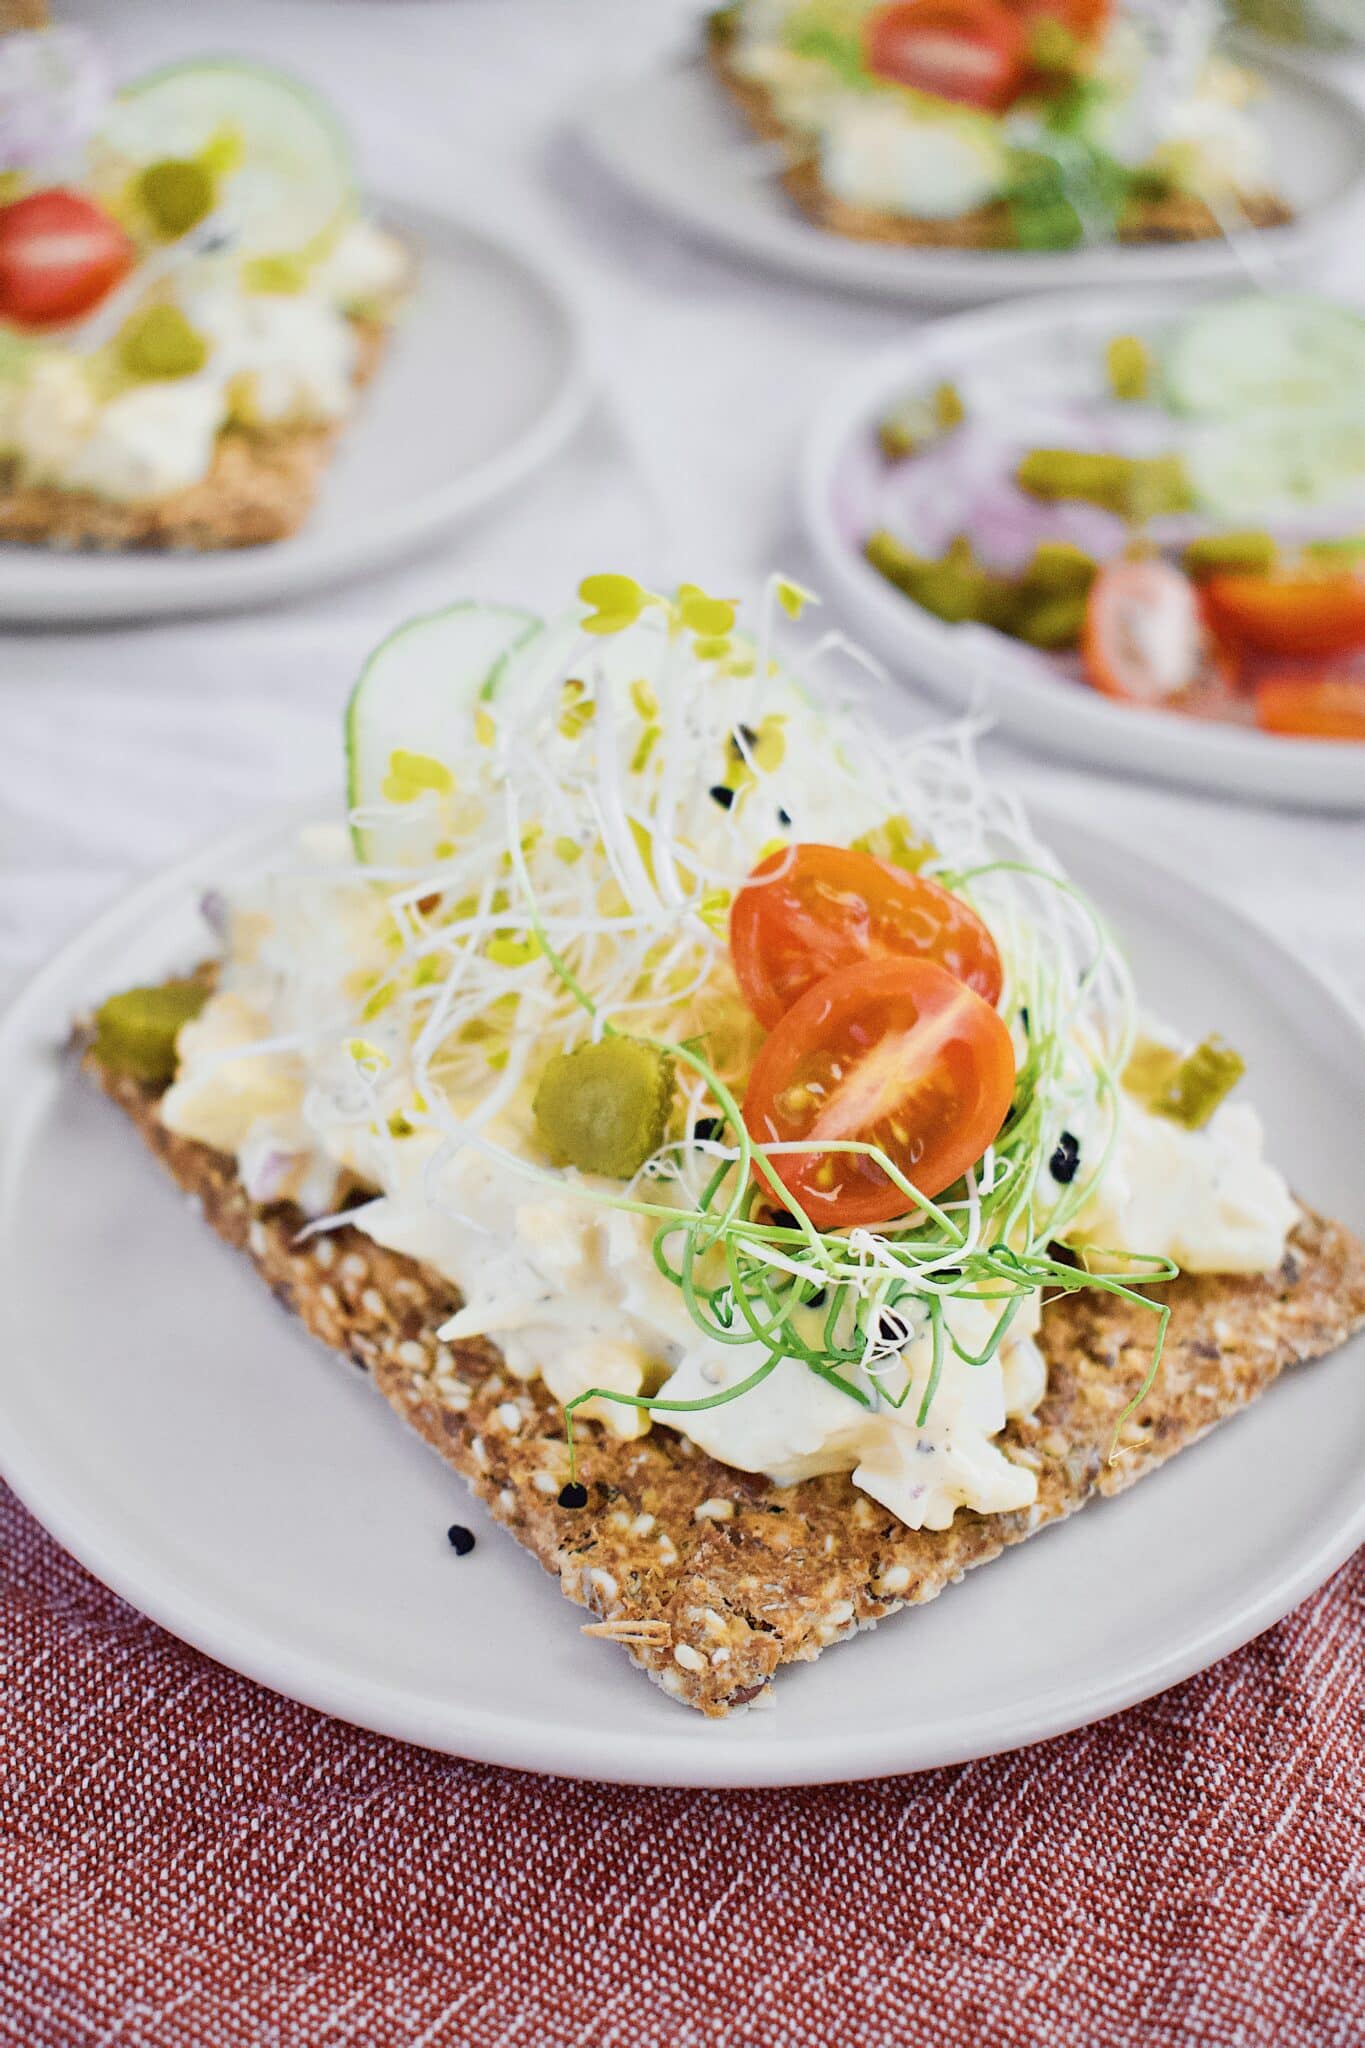 Nordic Egg Salad ready to eat on a crisp cracker with tomatoes and sprouts.